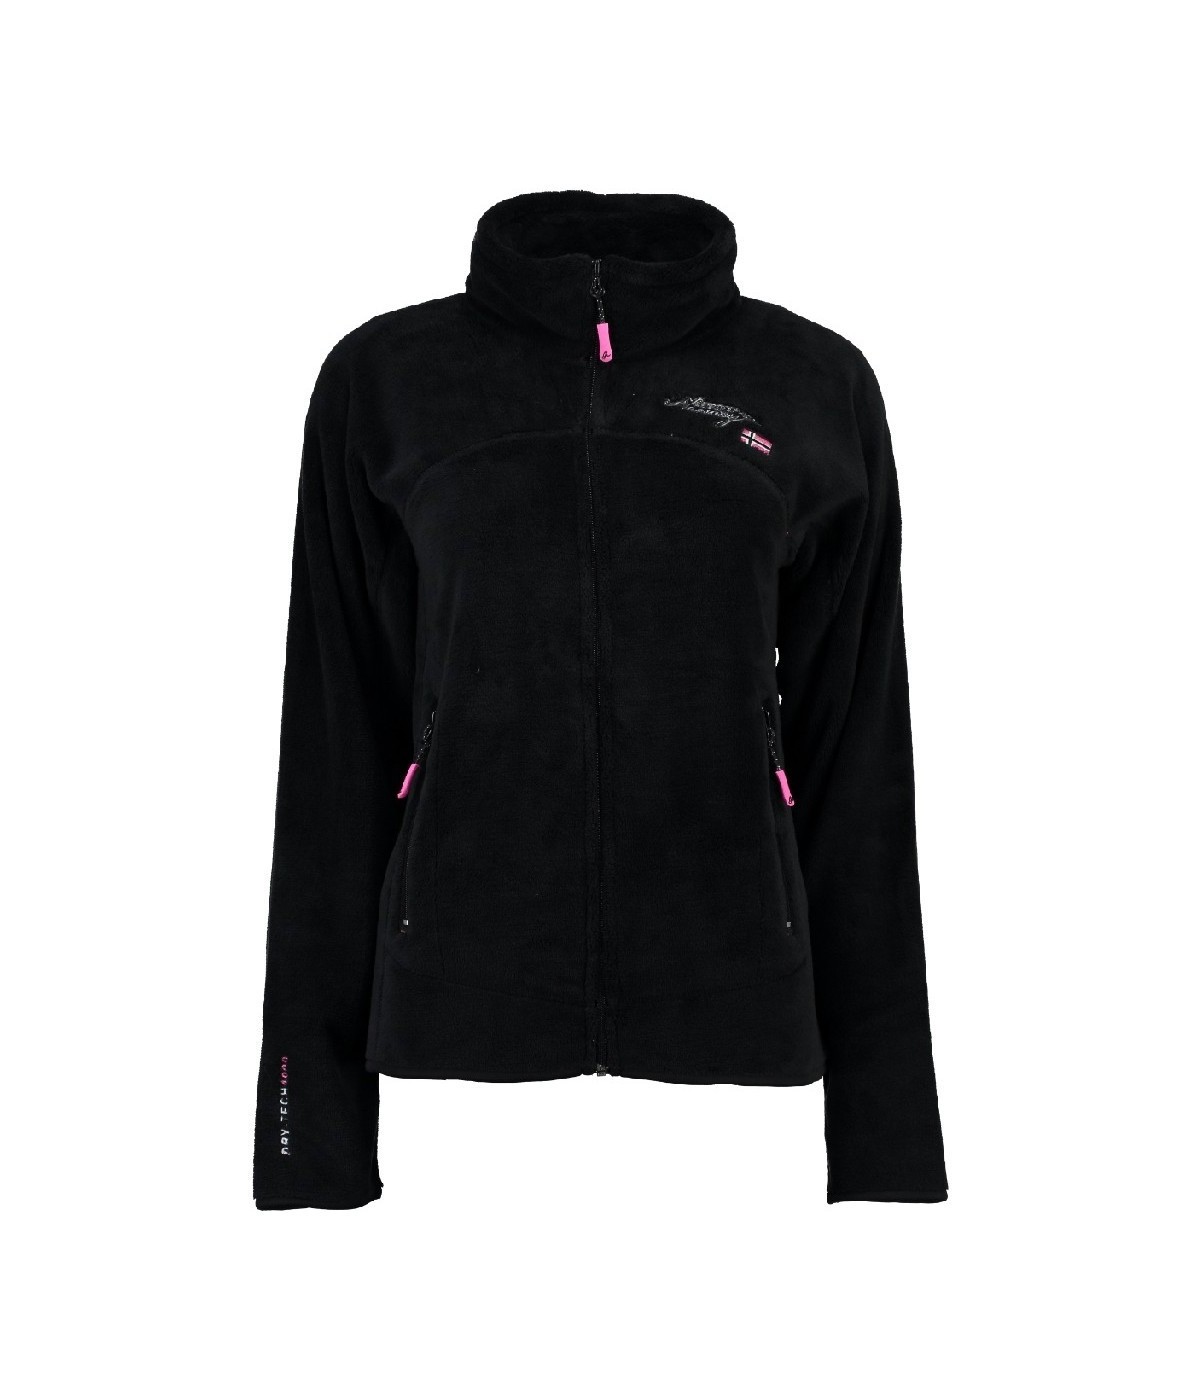 Polaire Femme Geographical Norway Upaline Noir